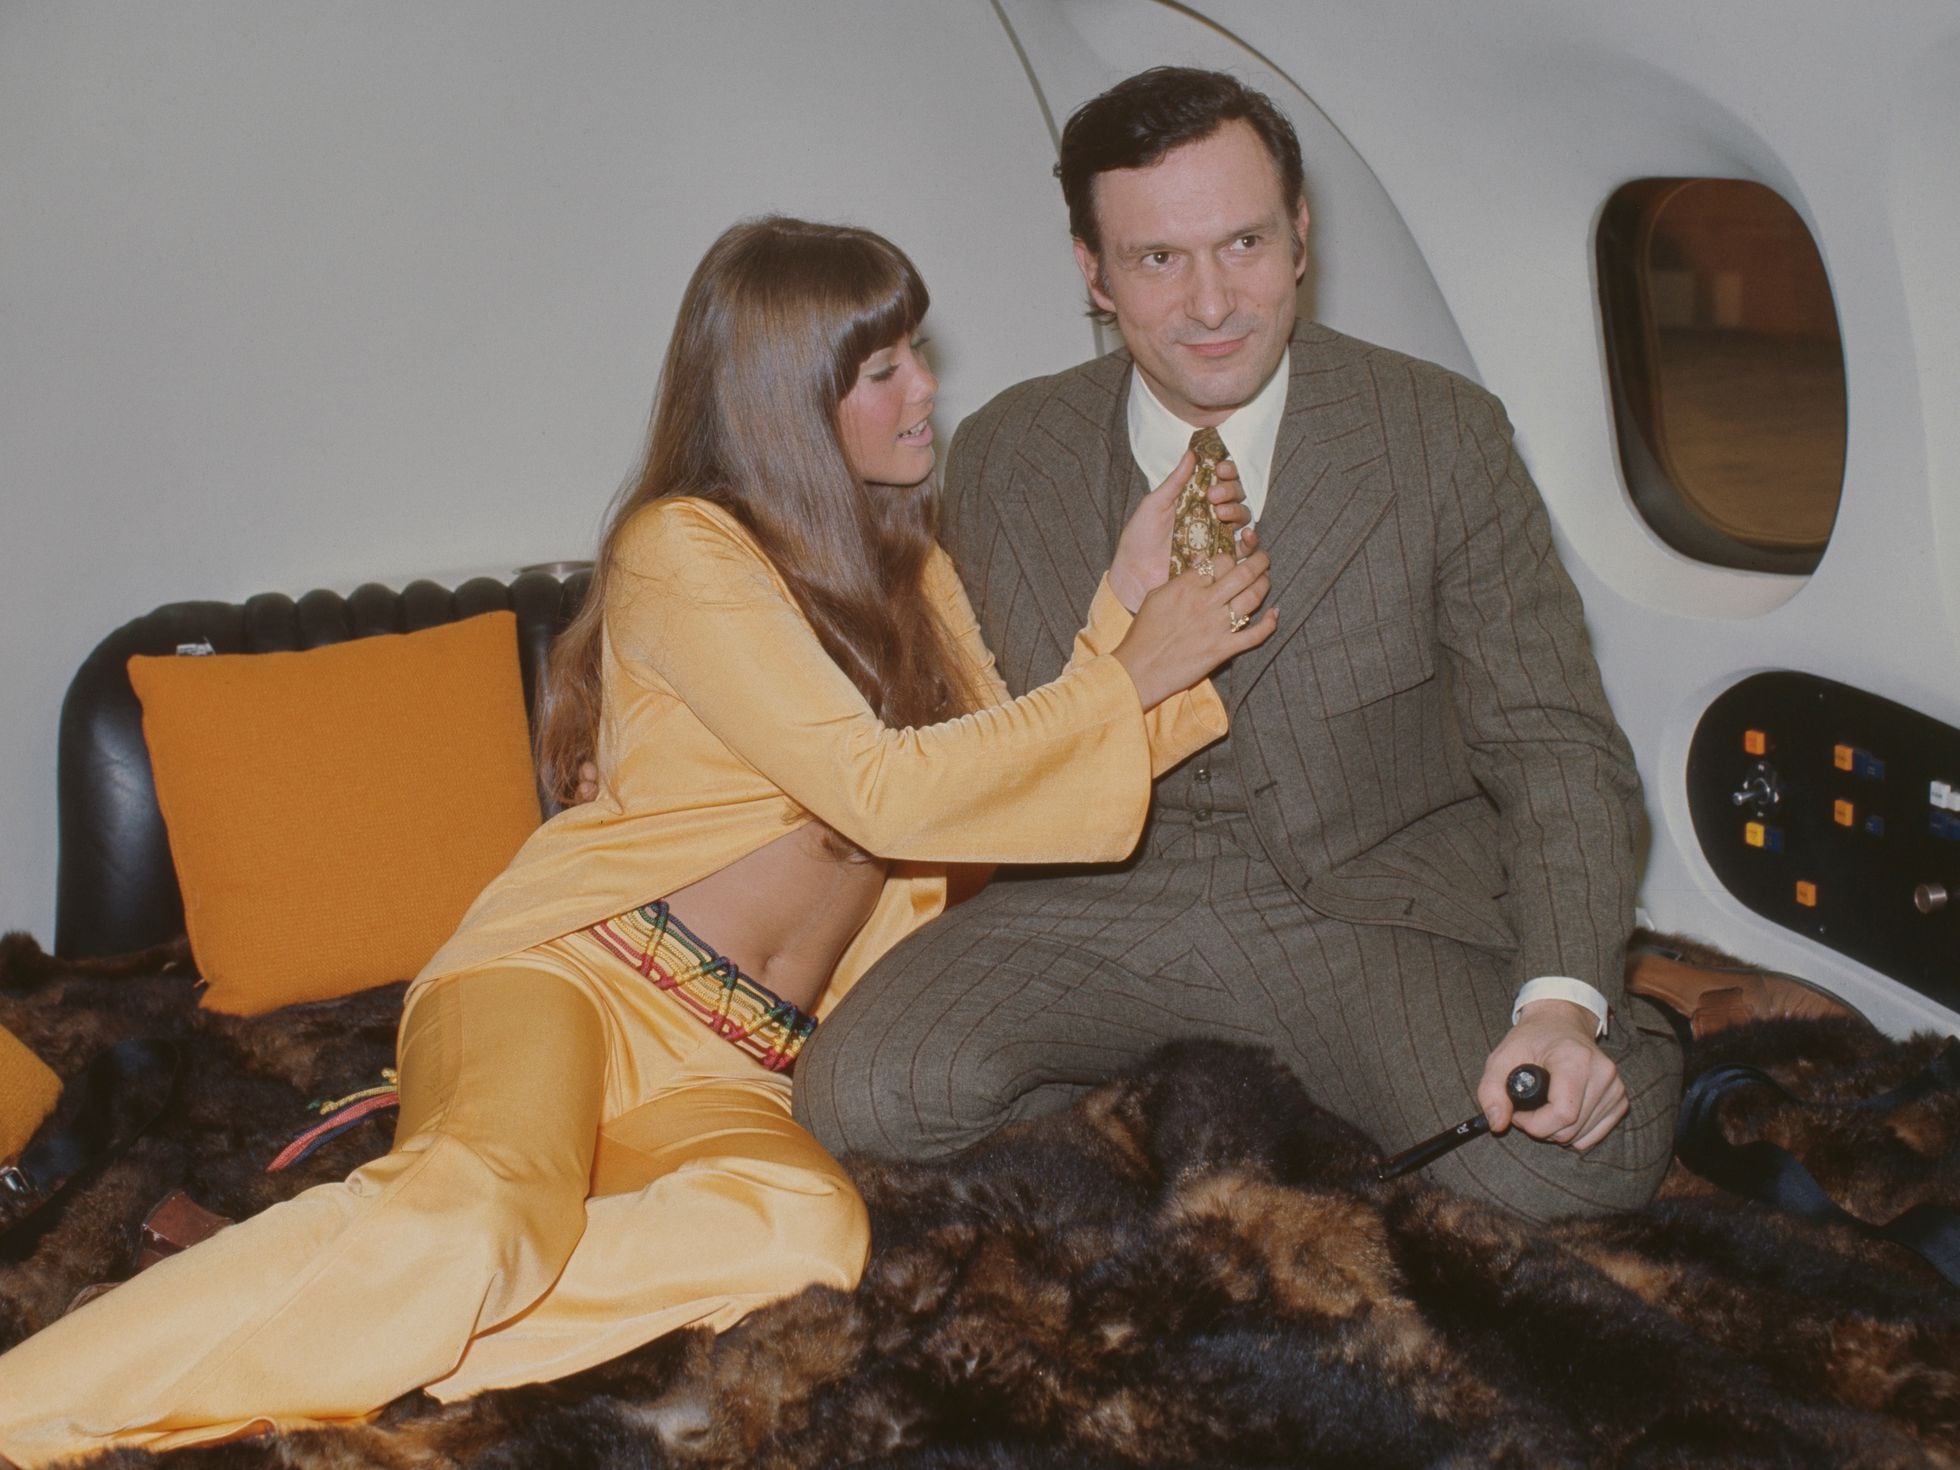 Sedatives, orgies and bestiality: The documentary that shines a light on  historical abuse at Hugh Hefner's Playboy mansion | USA | EL PAÍS English  Edition